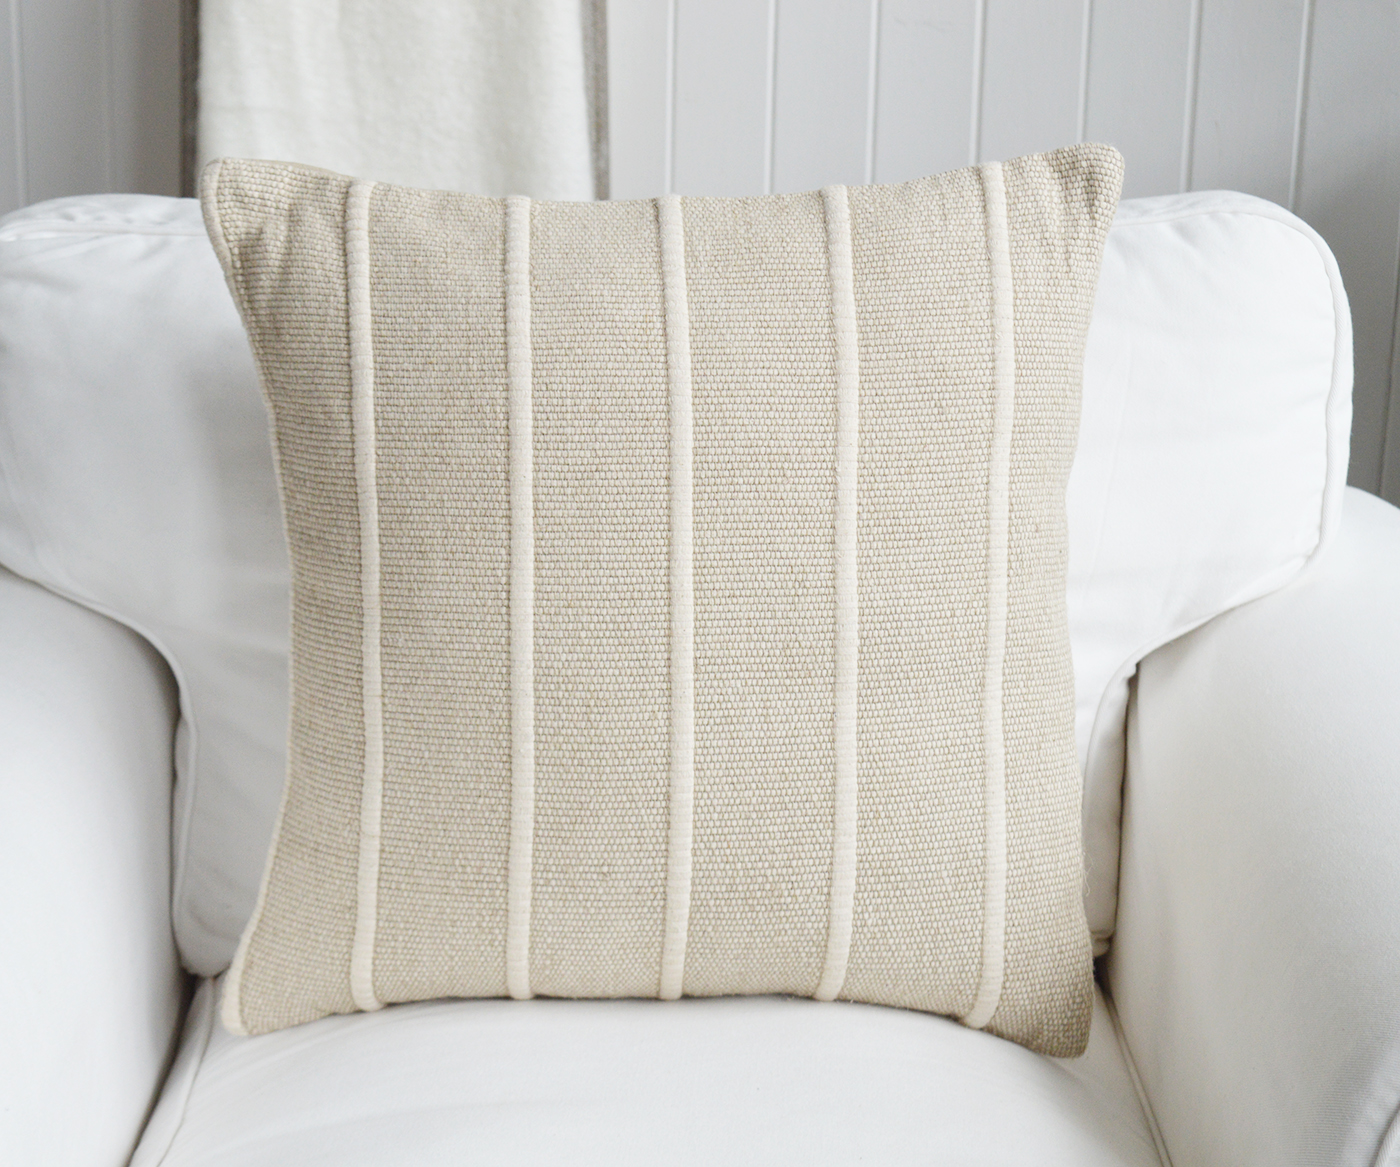 Winthrop New England style cushions - New England country and coastal cushions and interiors